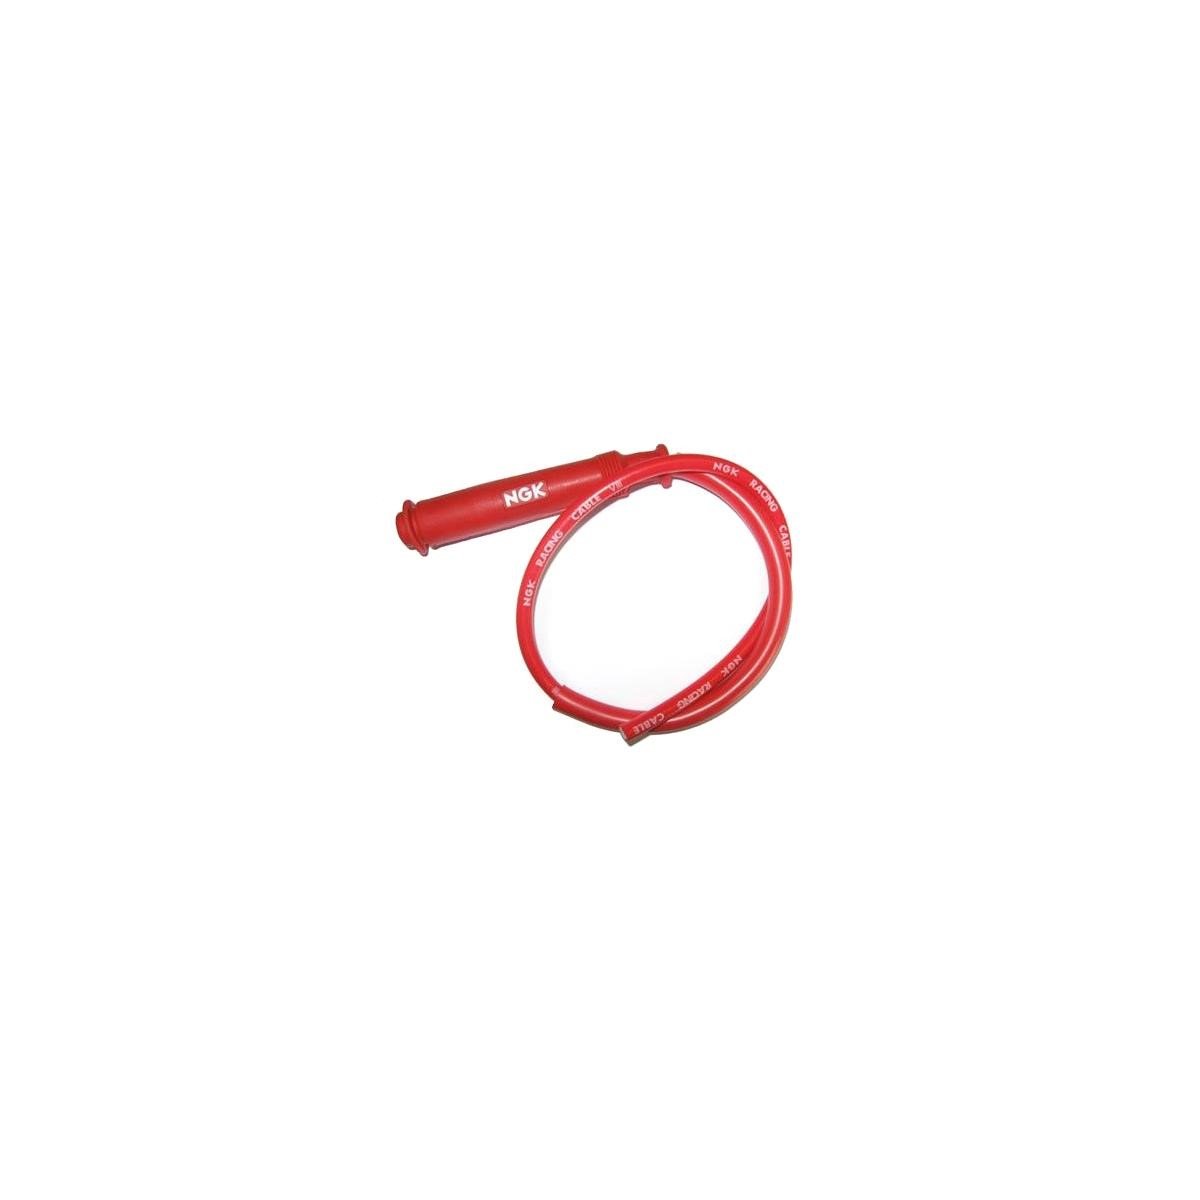 NGK ignition cable  including straight connector CR 1